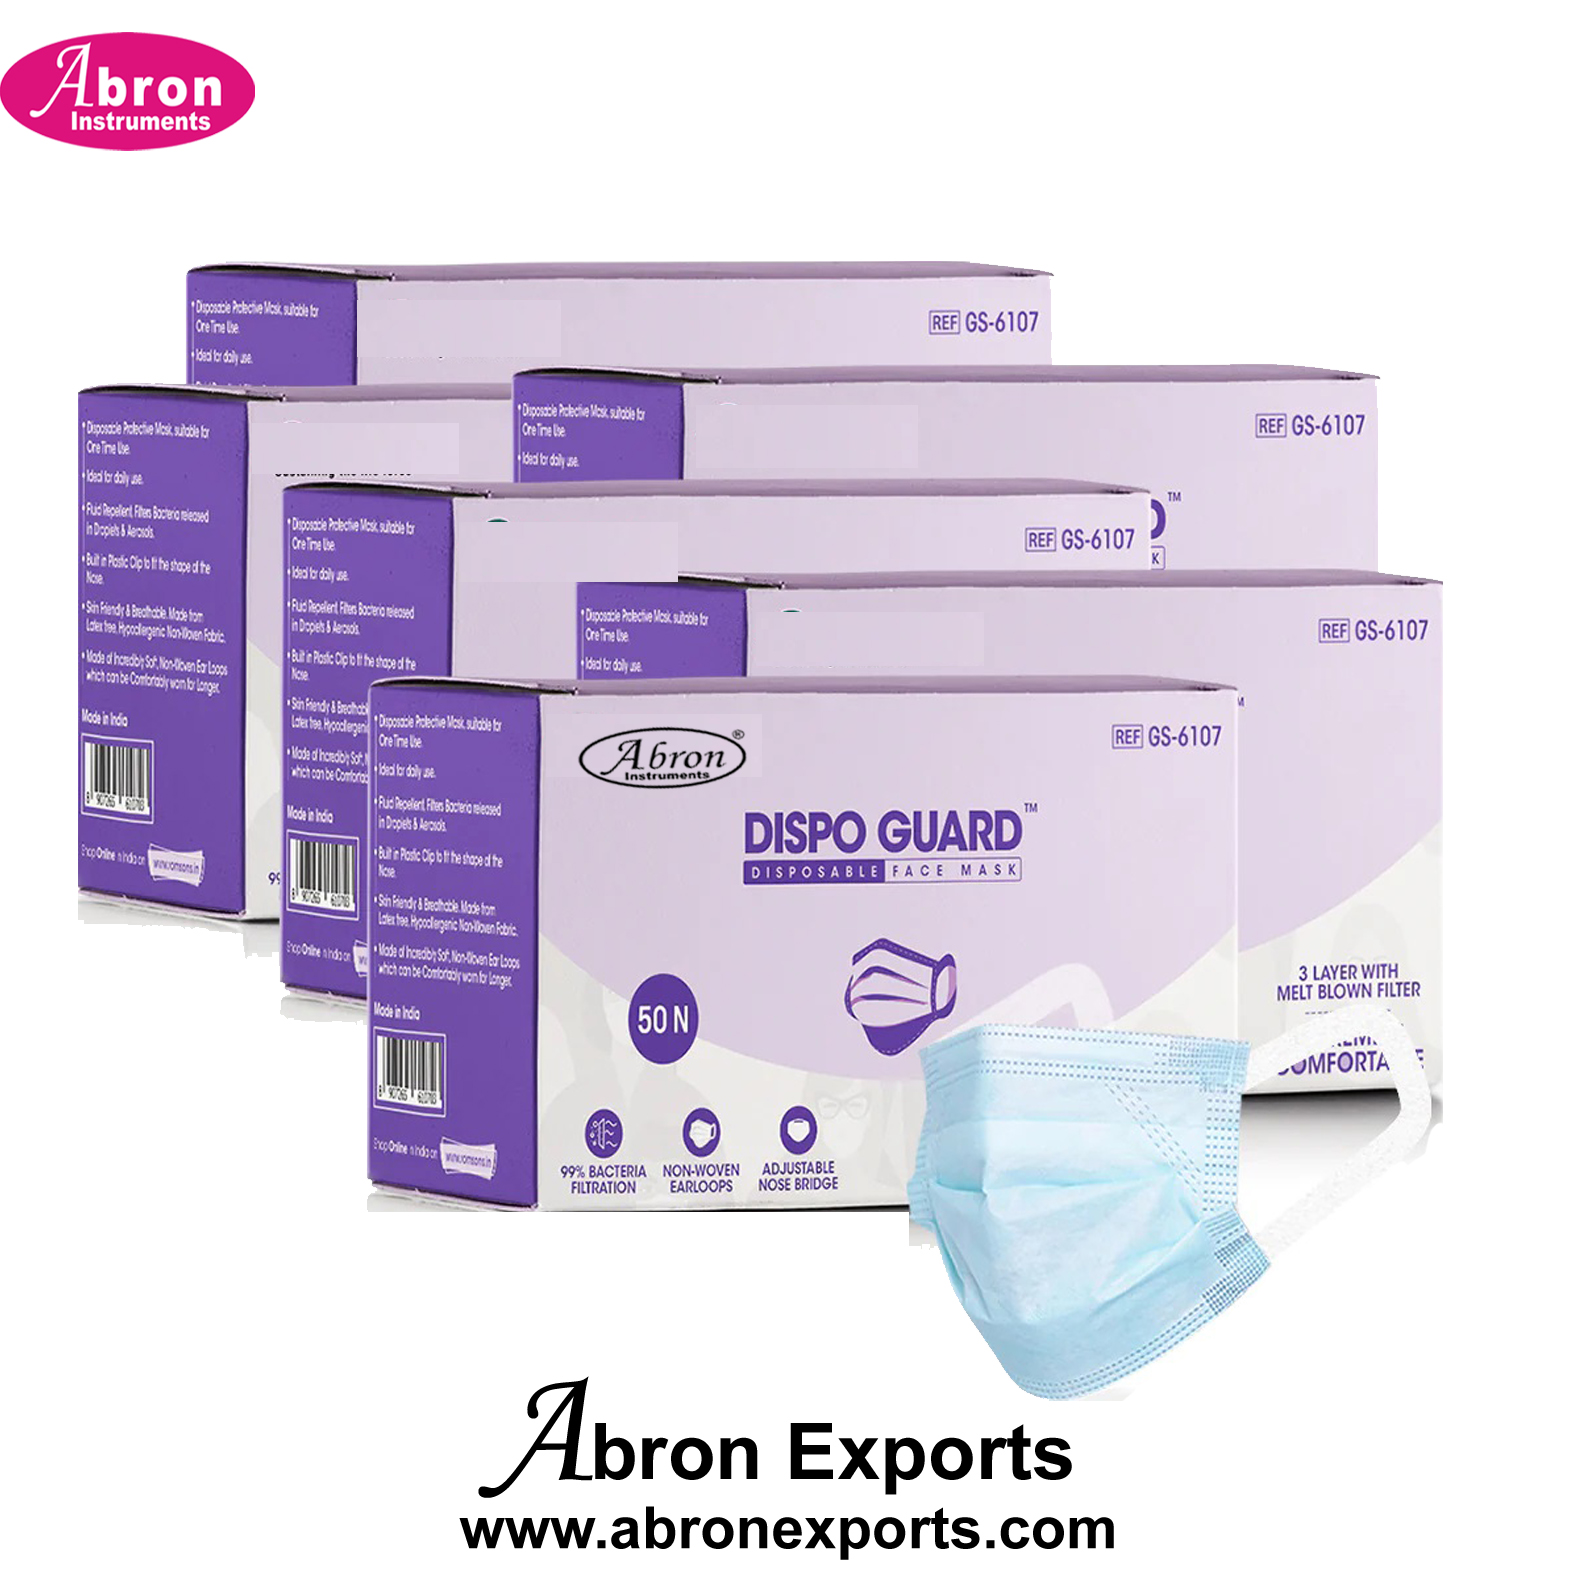 Face Mask Surgical 100pc 6-600pc With Nose Strip And Ear Strings 3 Ply Dispo-Guard Abron ABD-4142FM6H 